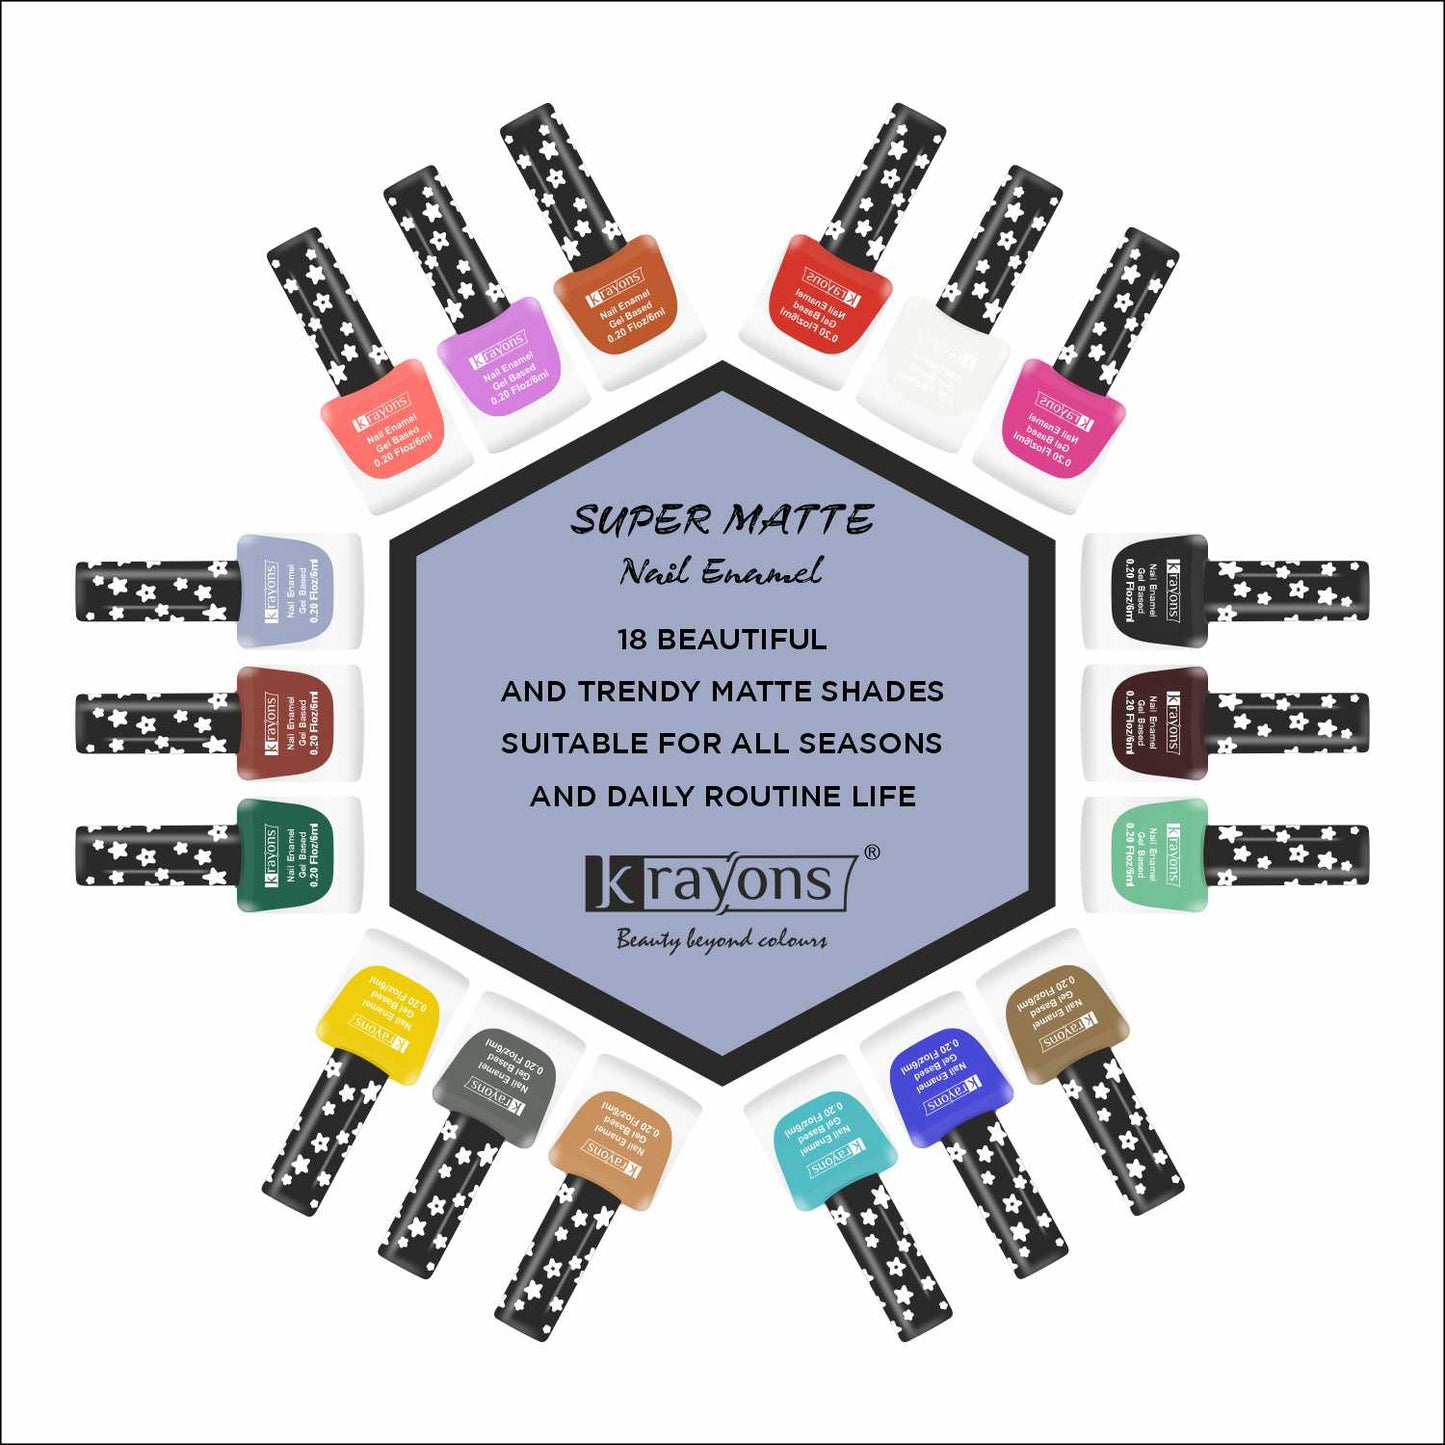 Krayons Cute Super Matte Finish Nail Enamel, Quick Dry, LongLasting, Blossom Peach, Hot Pink, Ruby Red, 6ml Each (Pack of 3)